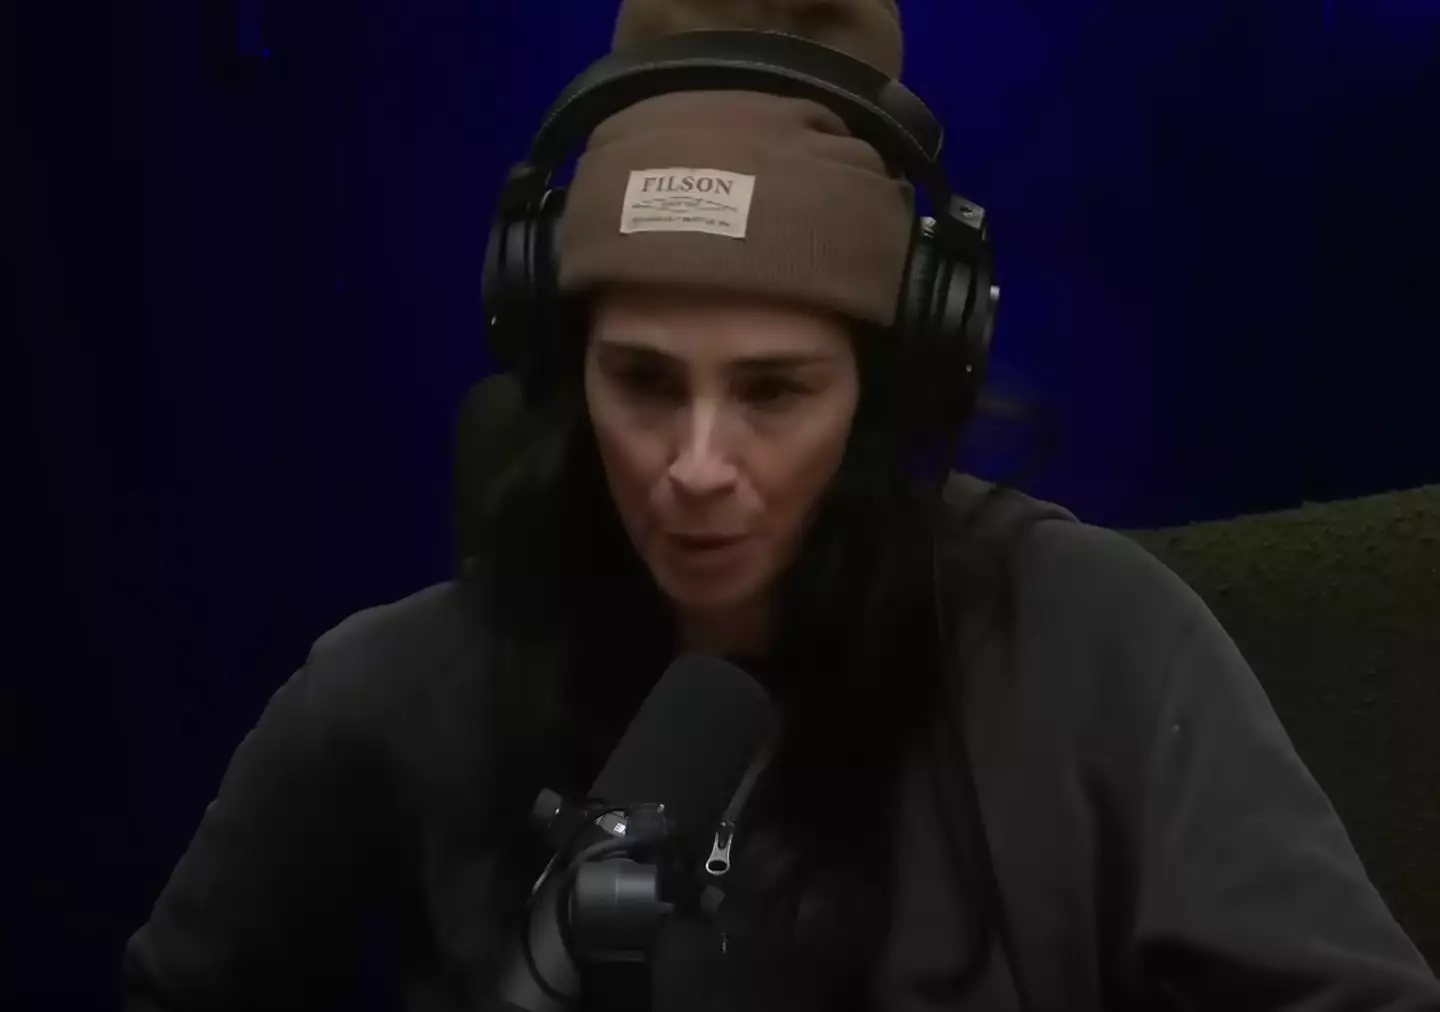 Sarah Silverman is afraid of becoming an old lady who doesn't know where she is and masturbates in public. Understandable, if a tad specific.